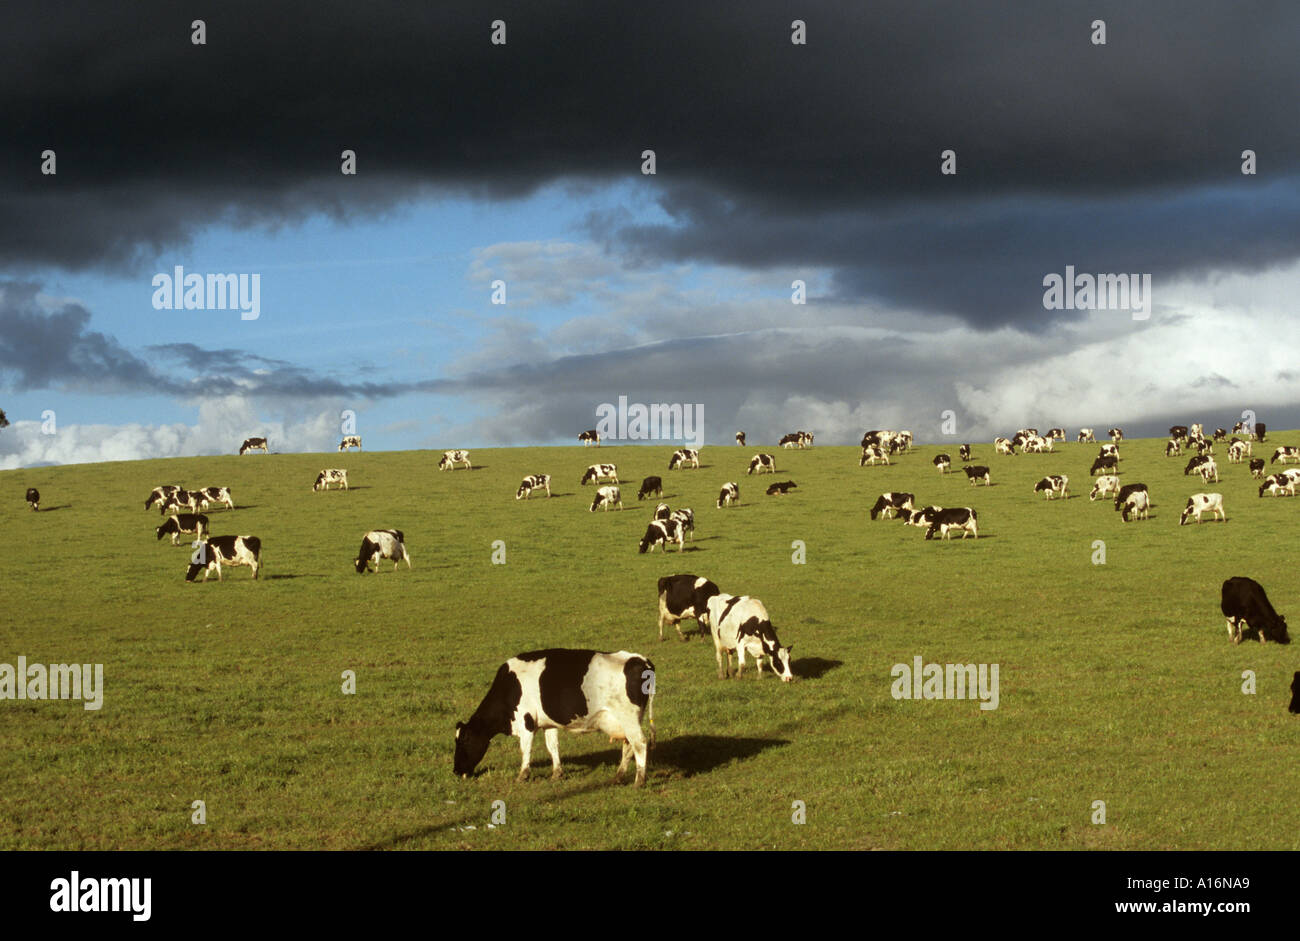 Dairy cows grazing in field with dramatic threatening sky Stock Photo